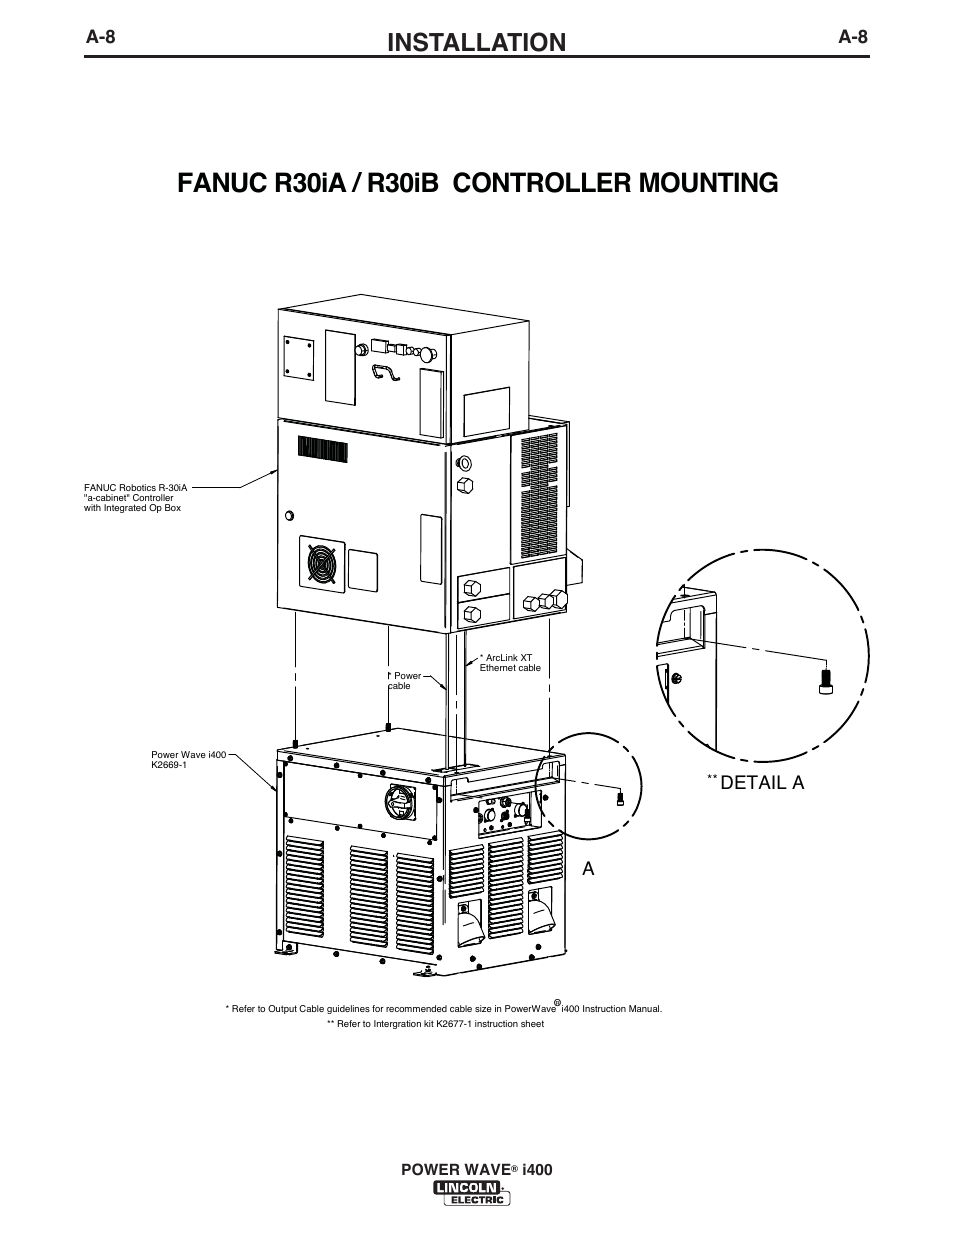 Fanuc R30ia R30ib Controller Mounting Installation Detail A A Lincoln Electric Im943 Power Wave I400 User Manual Page 17 57